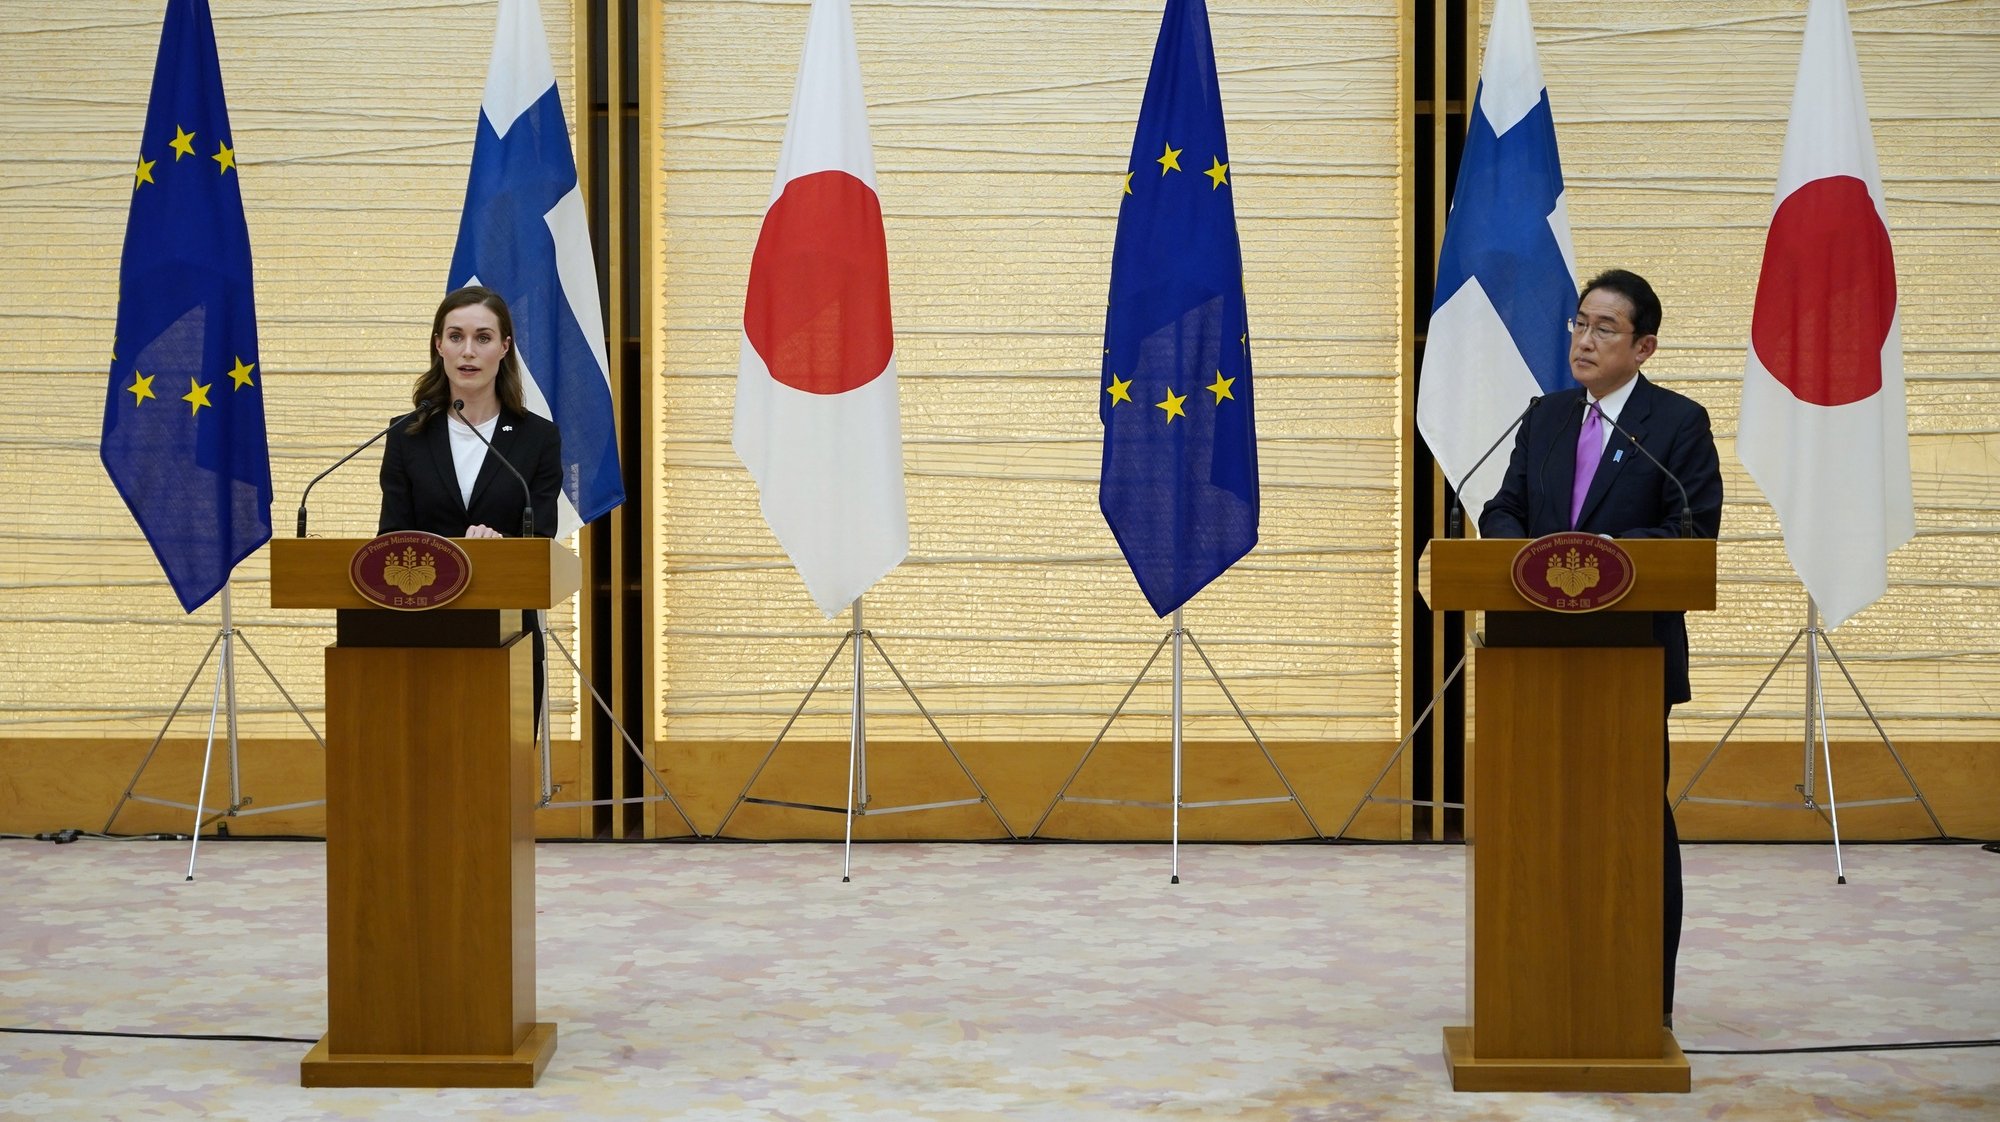 epa09939759 Finland&#039;s Prime Minister Sanna Marin (L) speaks next to Japan’s Prime Minister Fumio Kishida during a joint press announcement at the latter’s official residence in Tokyo, Japan, 11 May 2022. Finnish Prime Minister Marin and her Japanese counterpart strongly condemned Russia&#039;s invasion in Ukraine.  EPA/FRANCK ROBICHON / POOL